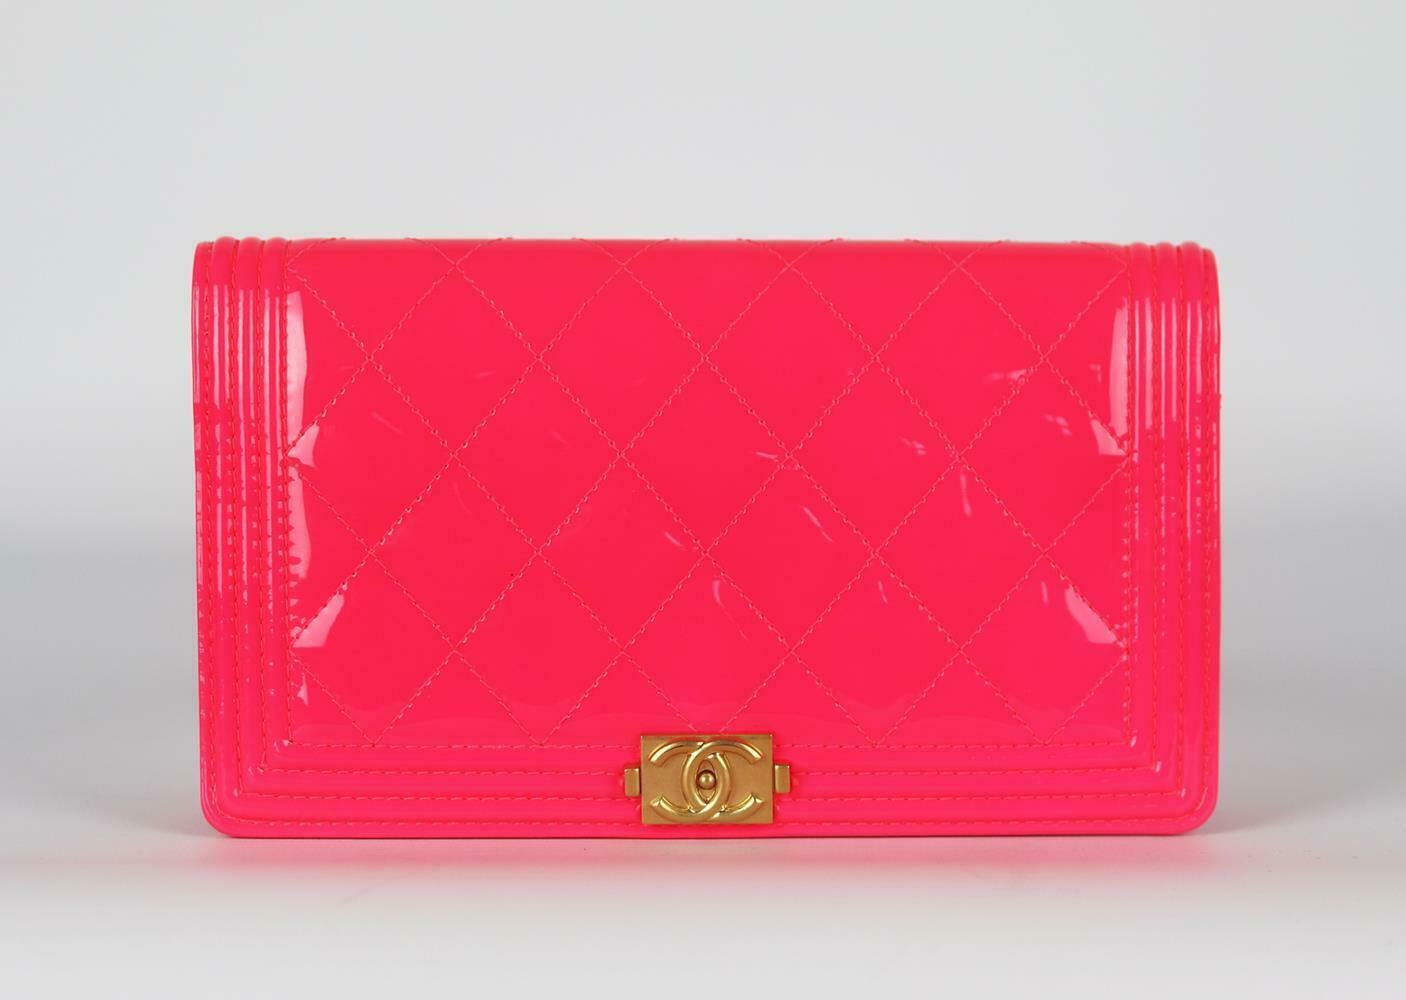 Made in Italy, this Chanel wallet has been made from neon-pink patent-leather exterior with bright-pink leather interior, this piece is decorated with Chanel's gold-toned logo on the front and finished with card slots and zip pouch for your